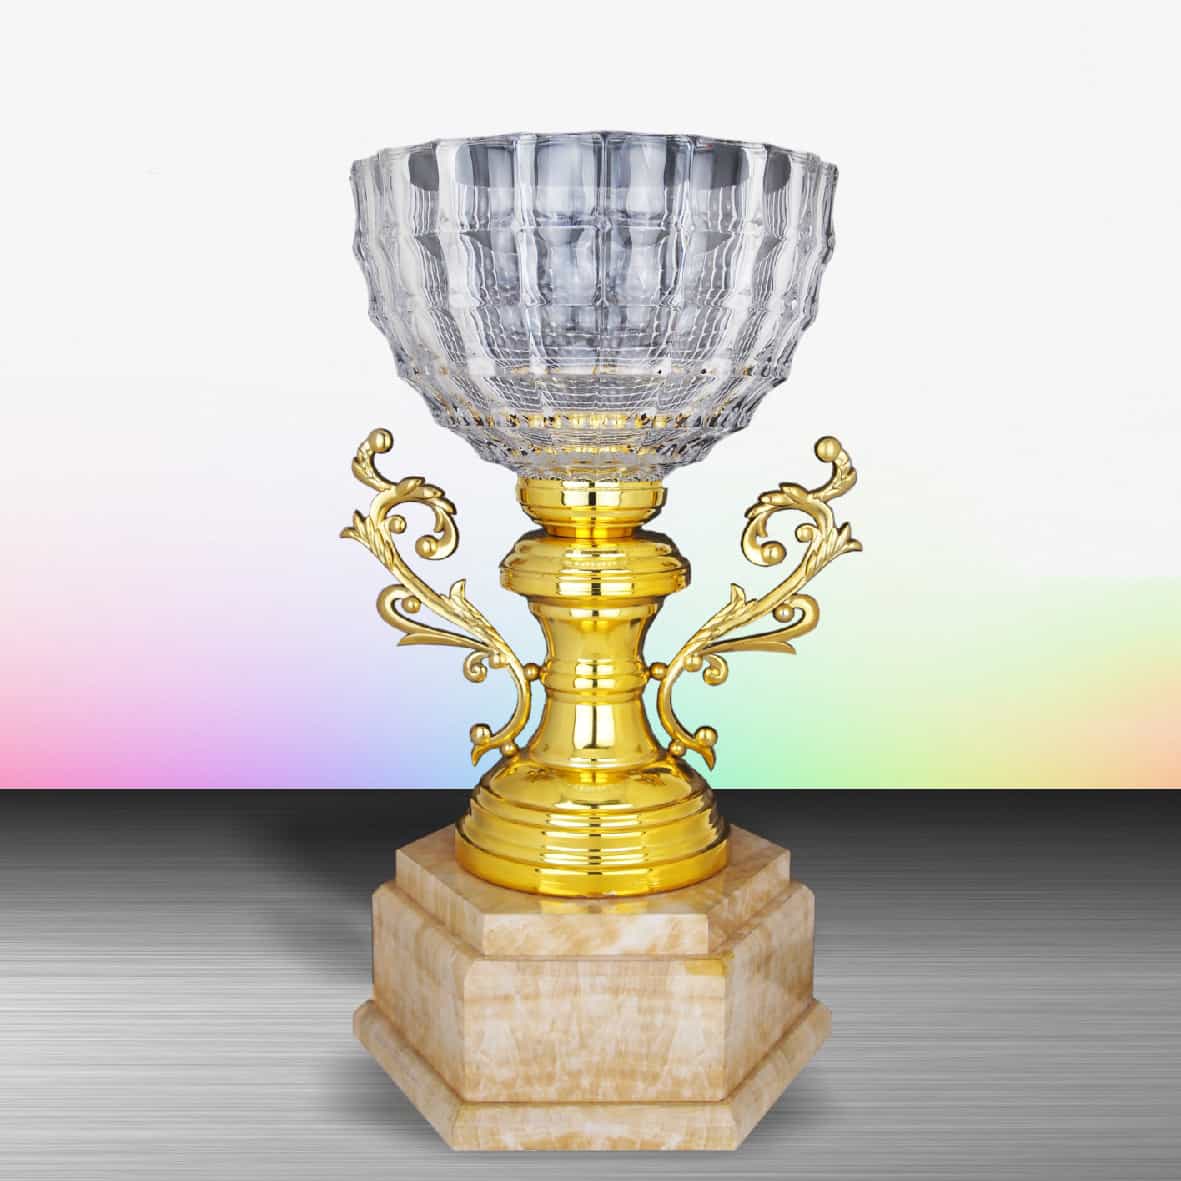 Silver Metal Crystal Bowl Trophy at Clazz Trophy Malaysia | #1 Rated Trophy Supplier in Malaysia